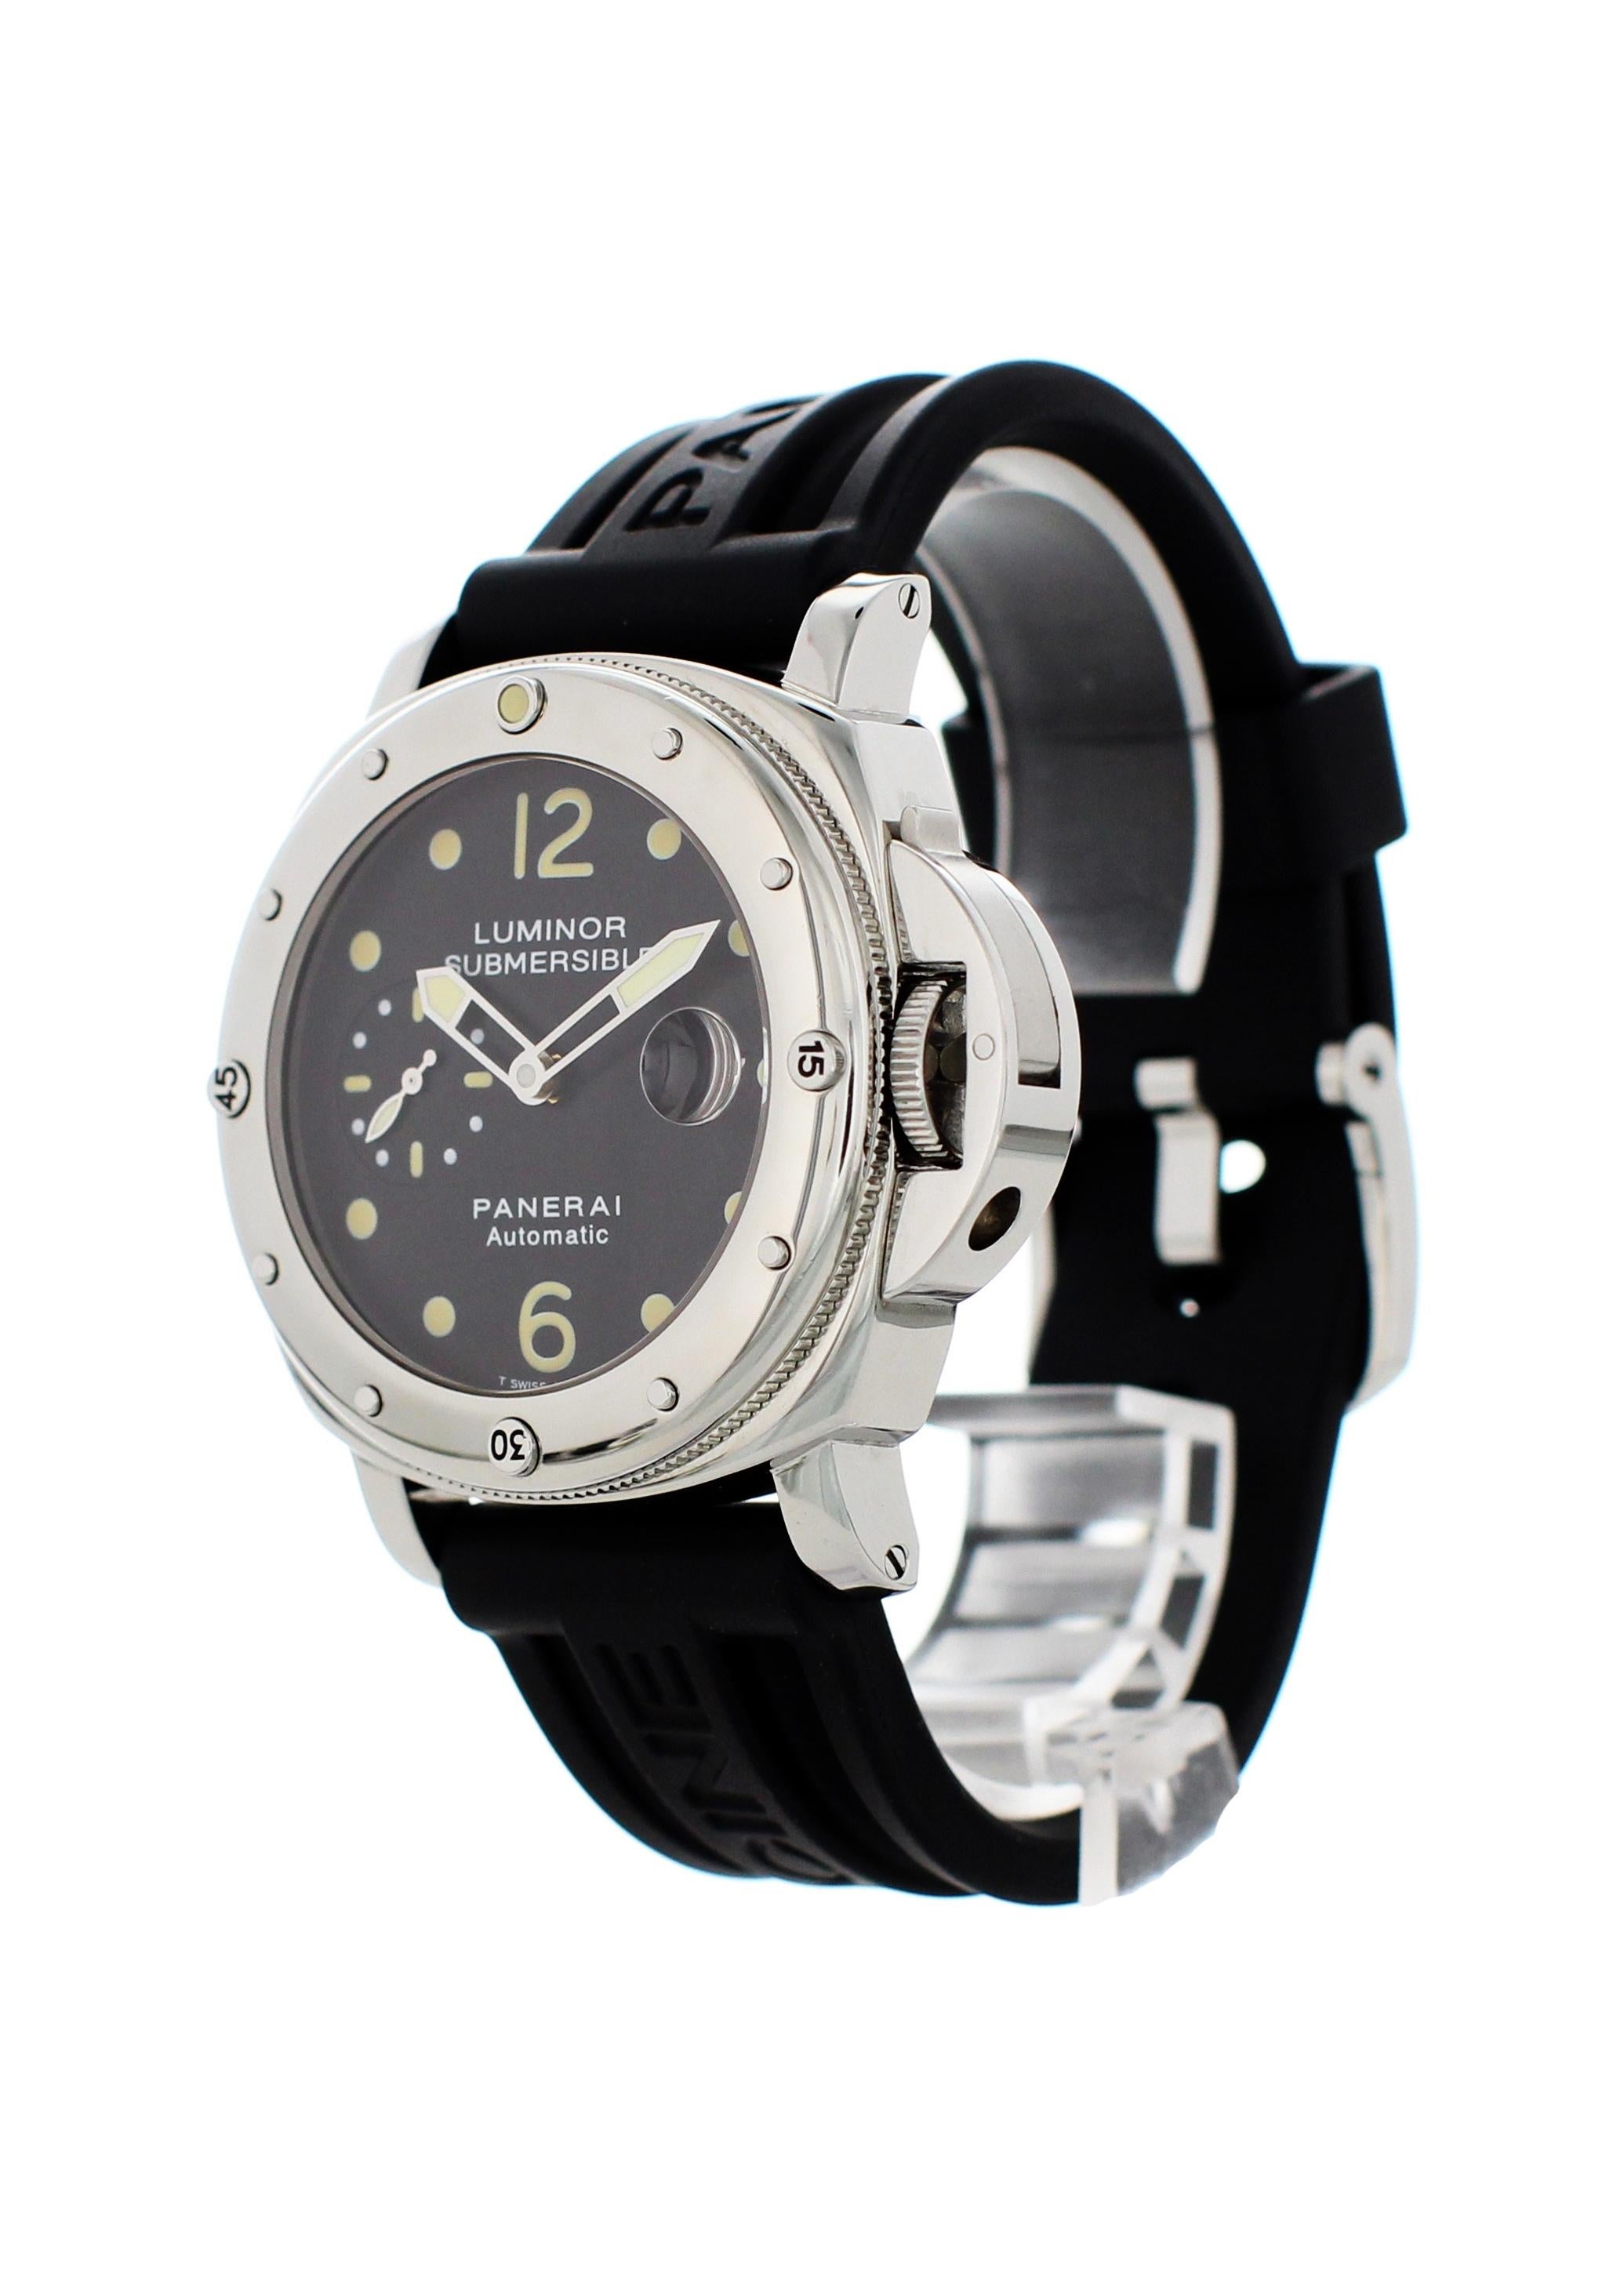 Panerai Luminor Submersible PAM24 Mens Watch. 44mm stainless steel case with unidirectional bezel. Black tritium dial. Small seconds sub-dial with luminous hands and indexes. Magnified date display. Locking crown. 24mm rubber strap with buckle. Will